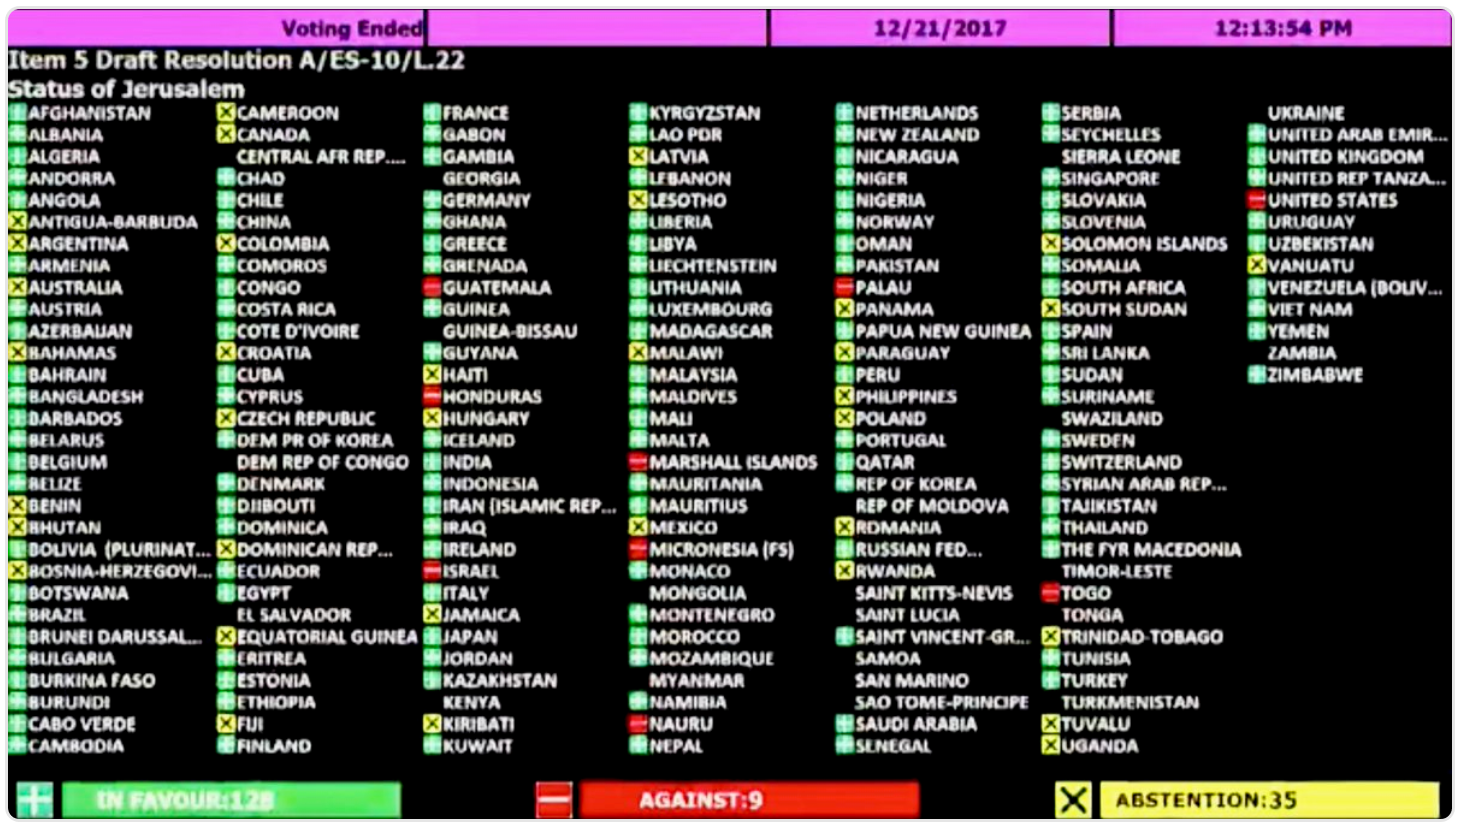 UN vote on requiring UN resolutions to be followed